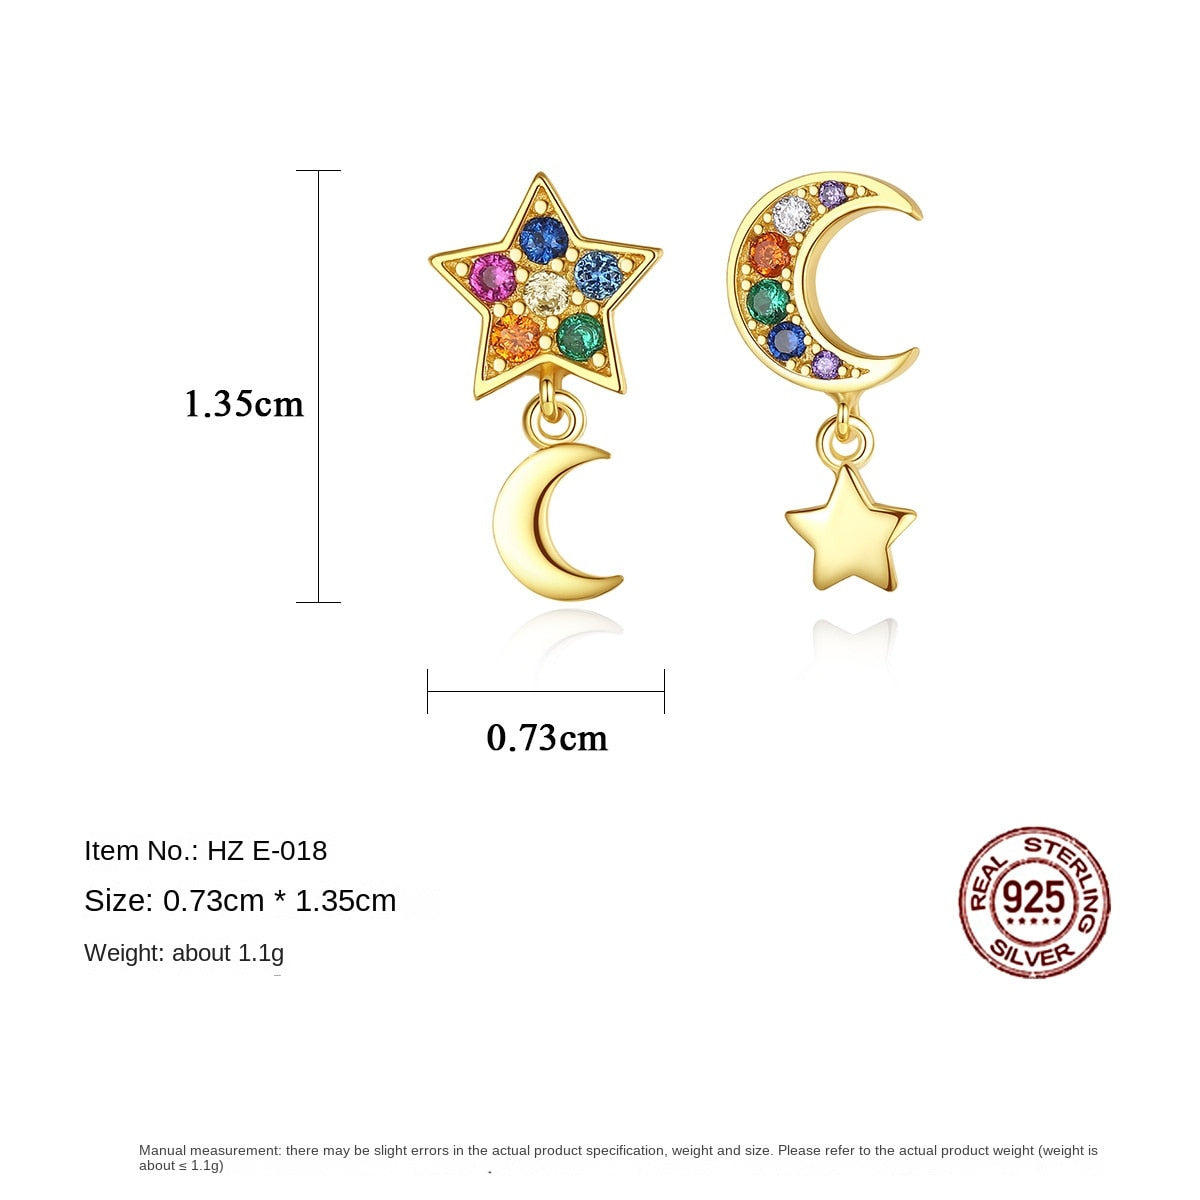 Gemstonely-Charming S925 Silver Asymmetric Star and Moon Earrings - Colorful Zirconia Ear Studs